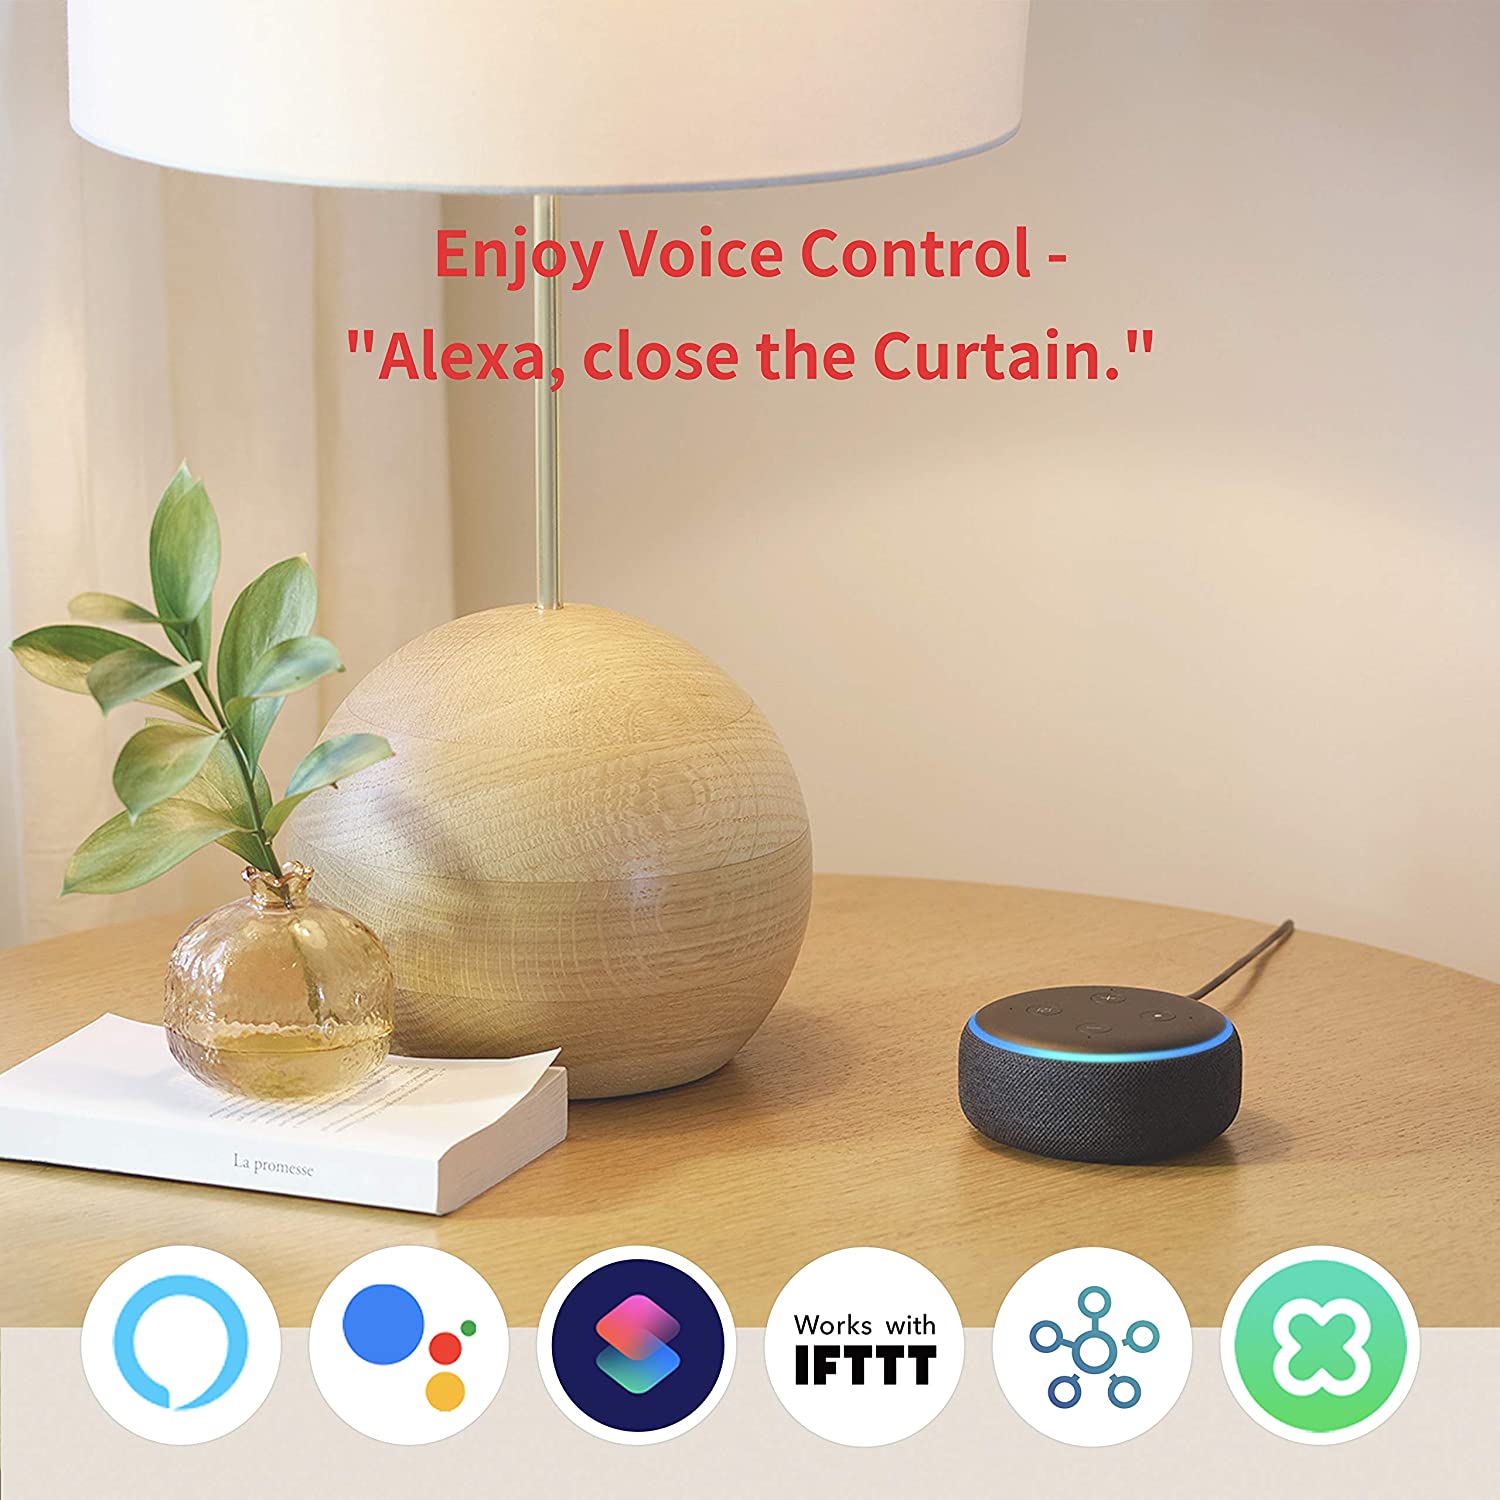 SwitchBot Curtain (I Rail) | Smart Curtain Controller - Add SwitchBot Hub Mini to Make it Compatible with Alexa, Google Home, IFTTT